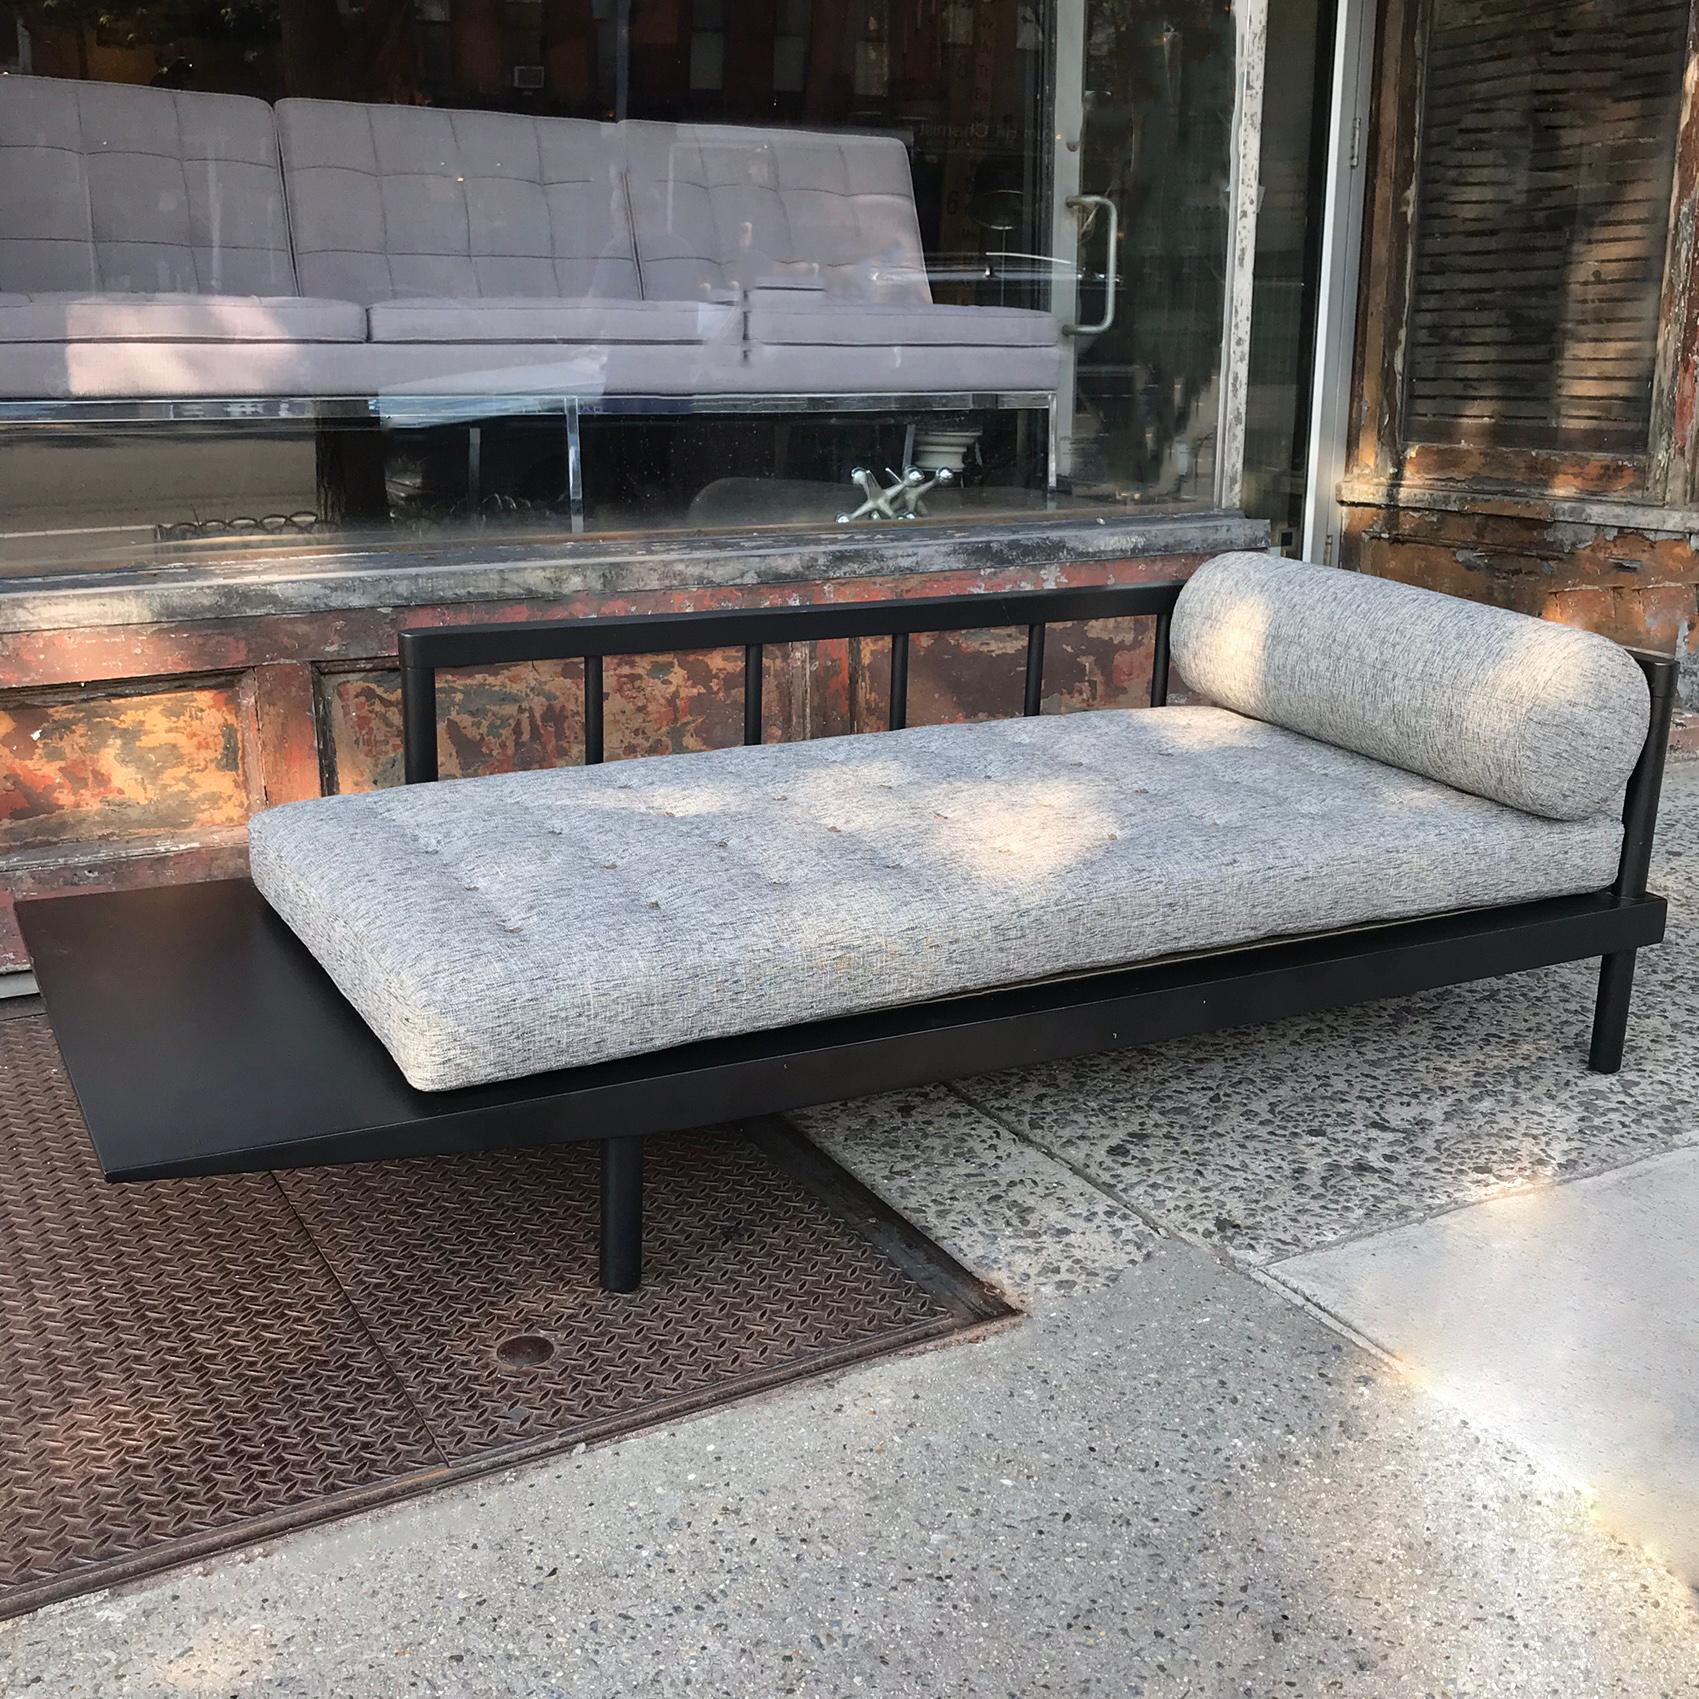 Low profile, mid century modern, daybed sofa attributed to George Nelson for Herman Miller features a cantilever side surface with rail back and side finished in black satin lacquer is newly upholstered in a salt and pepper cotton tweed with custom